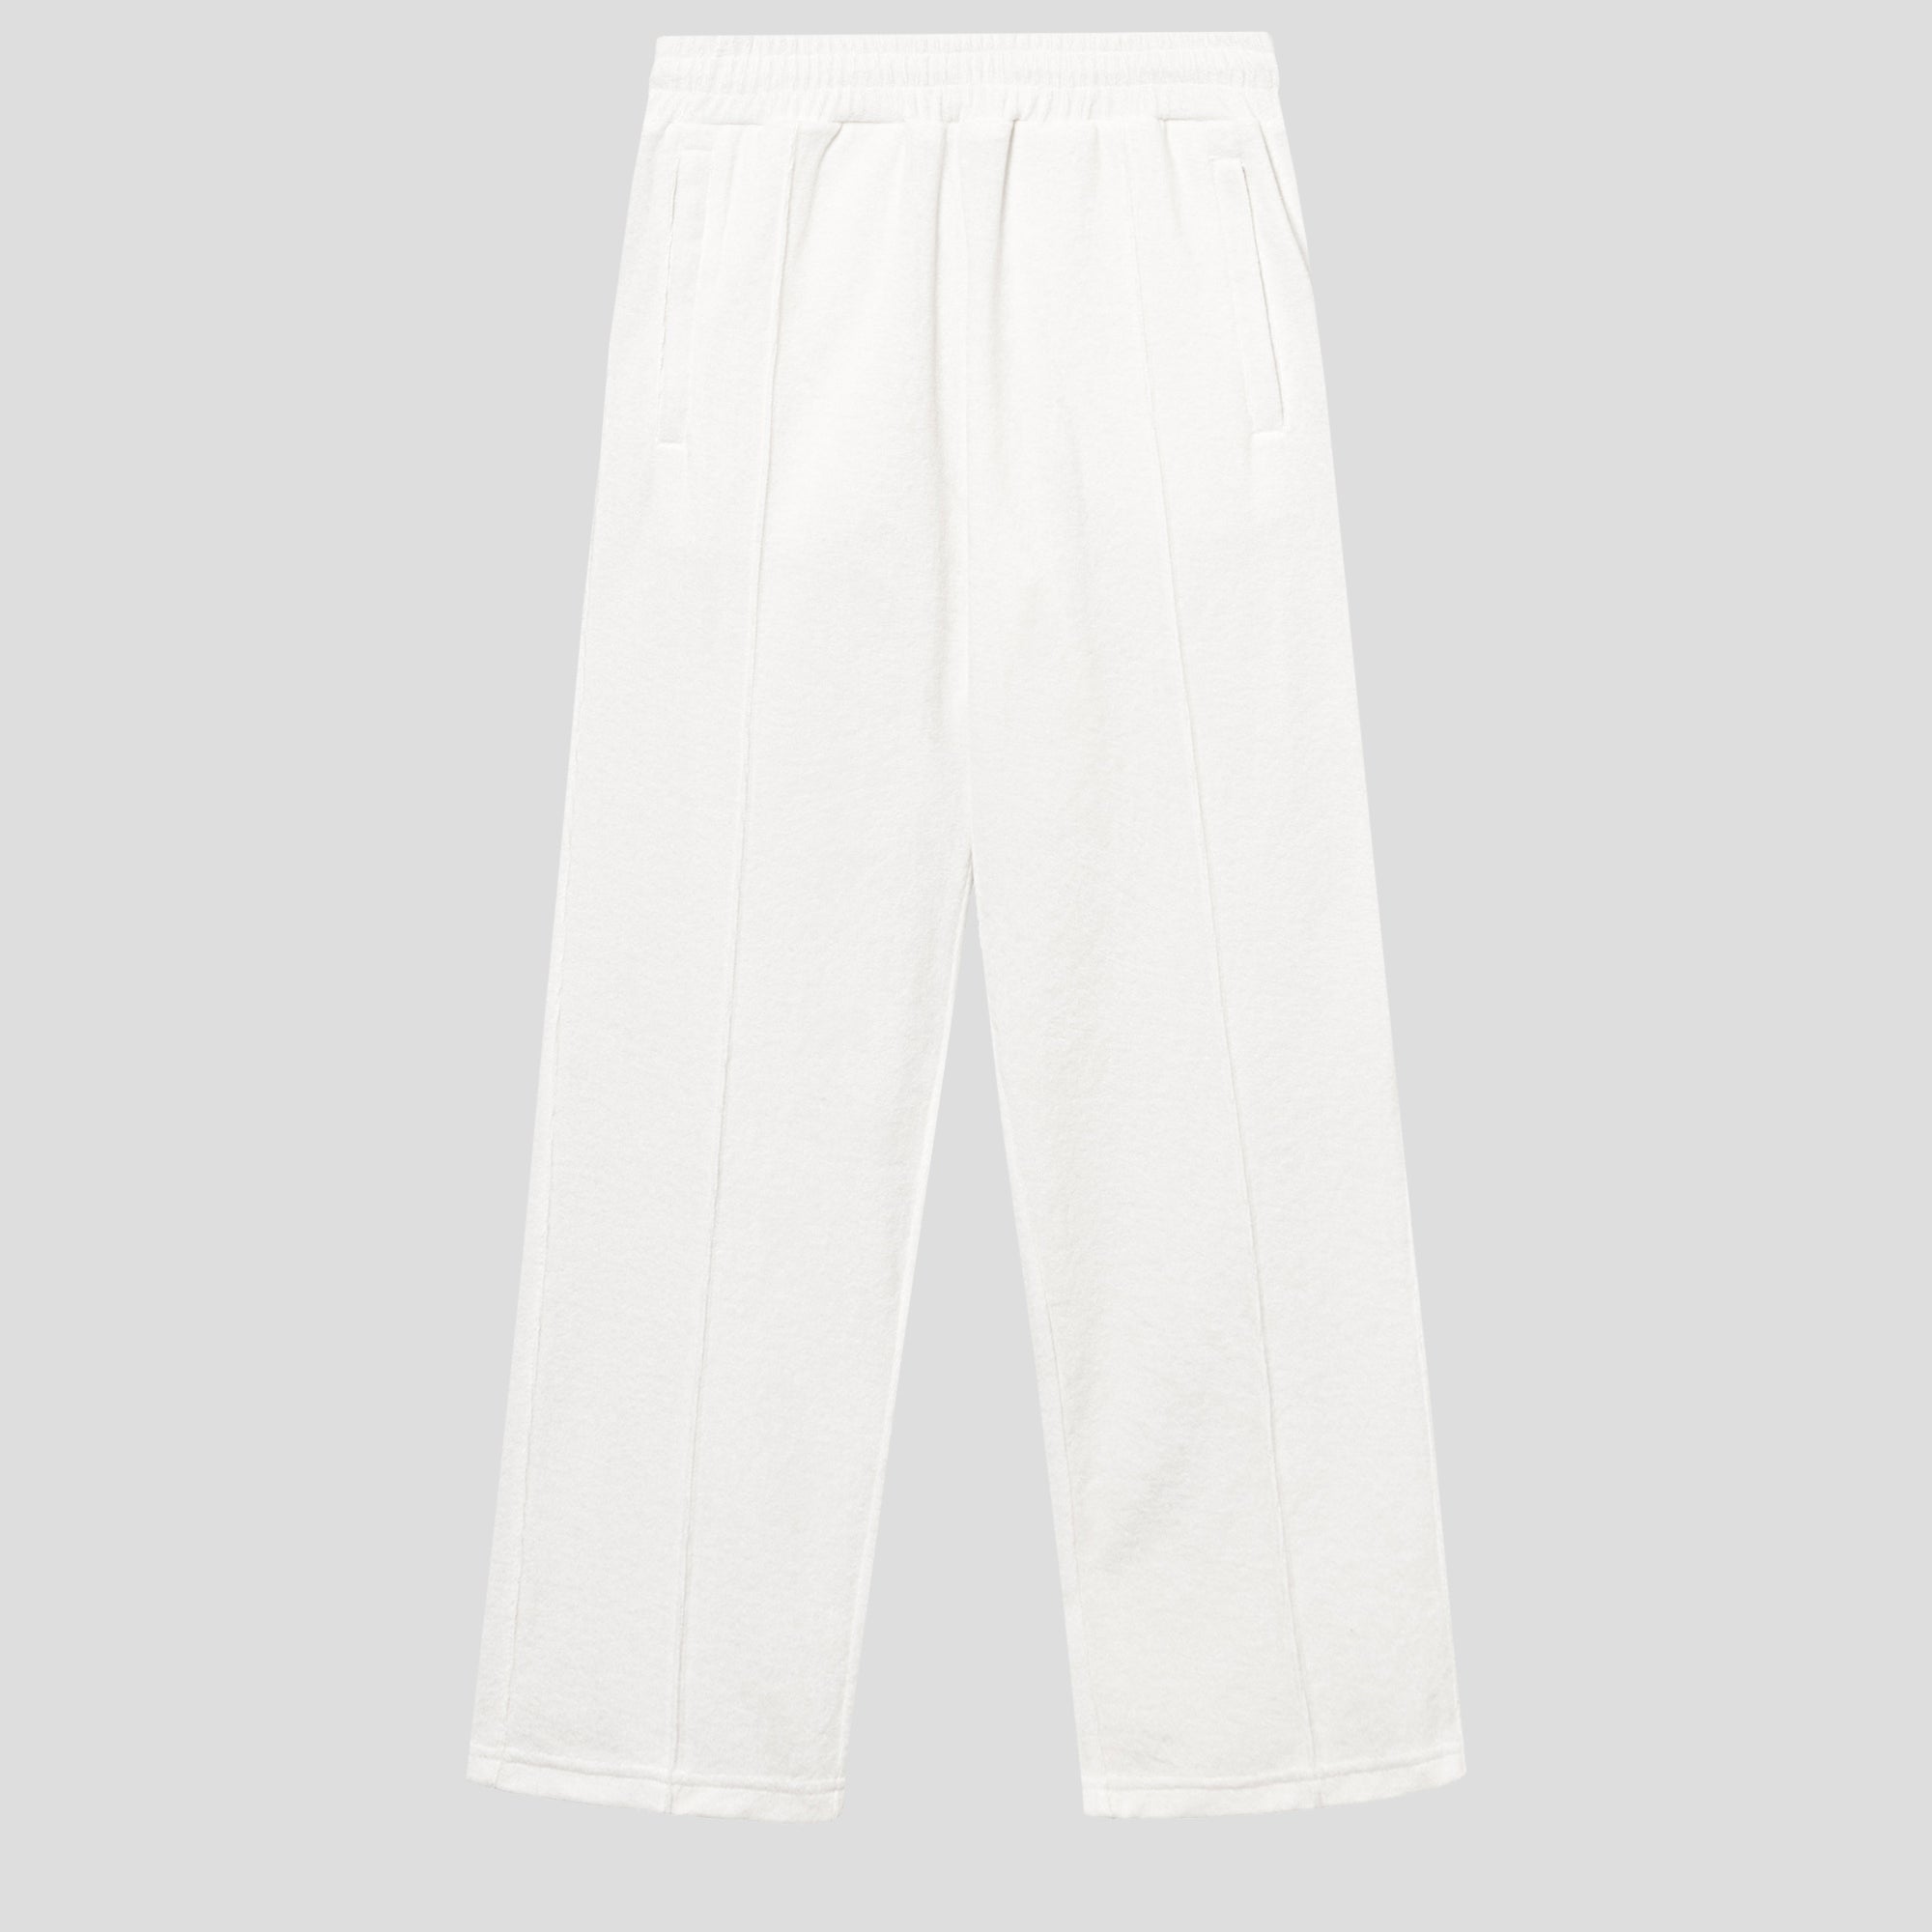 Off white pants in terry toweling fabric